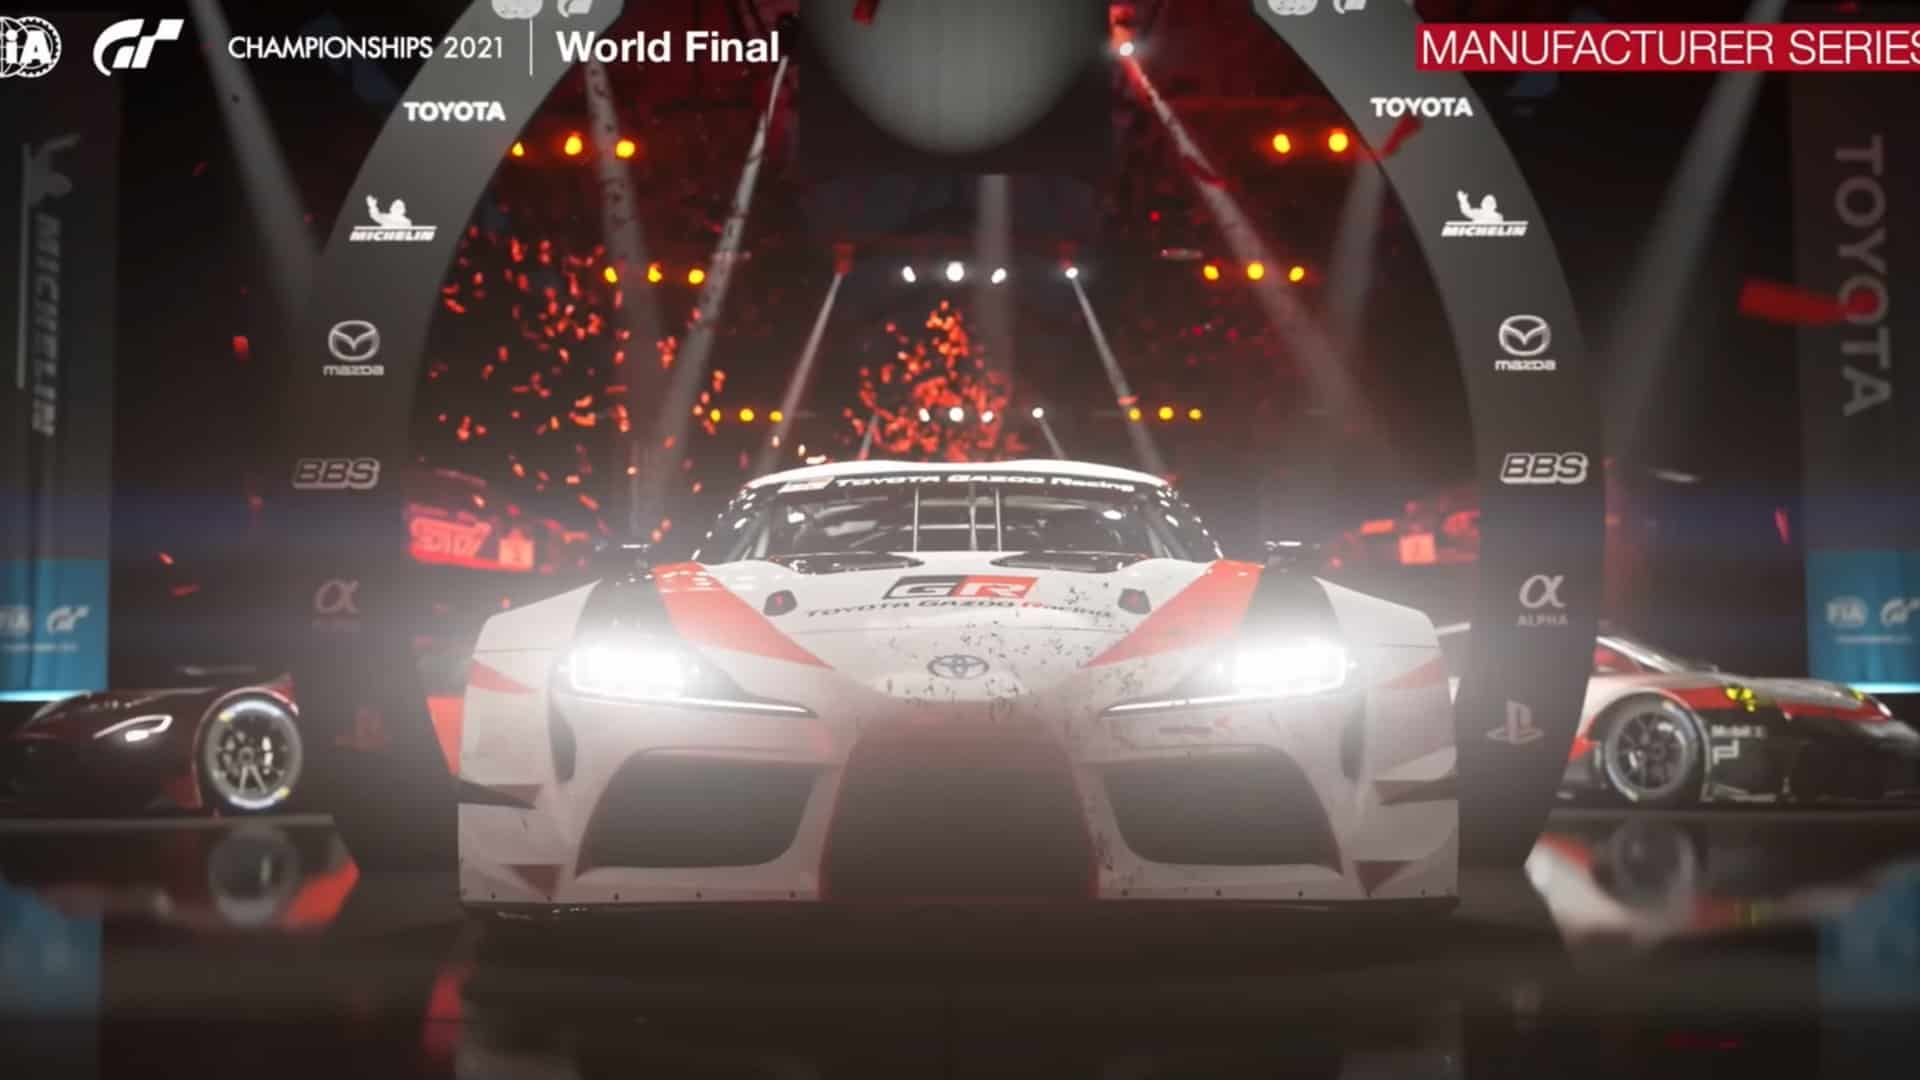 Toyota wins FIA Gran Turismo Manufacturer Series for a second time